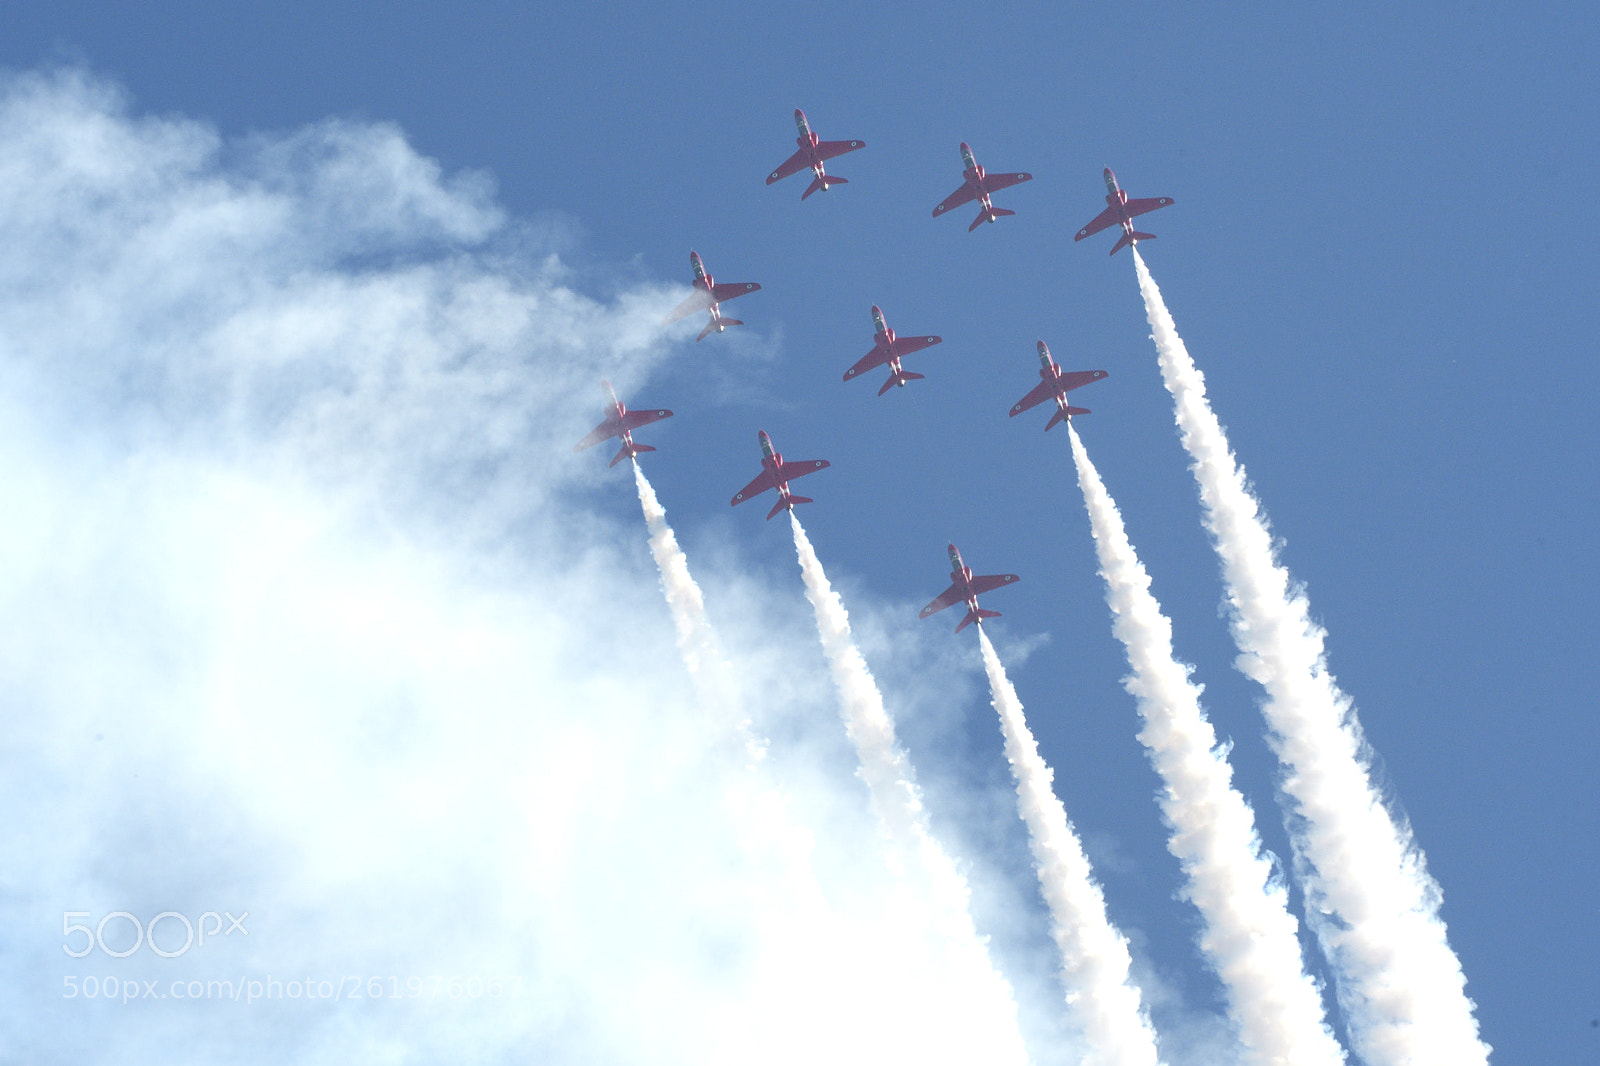 Nikon D500 sample photo. The red arrows photography